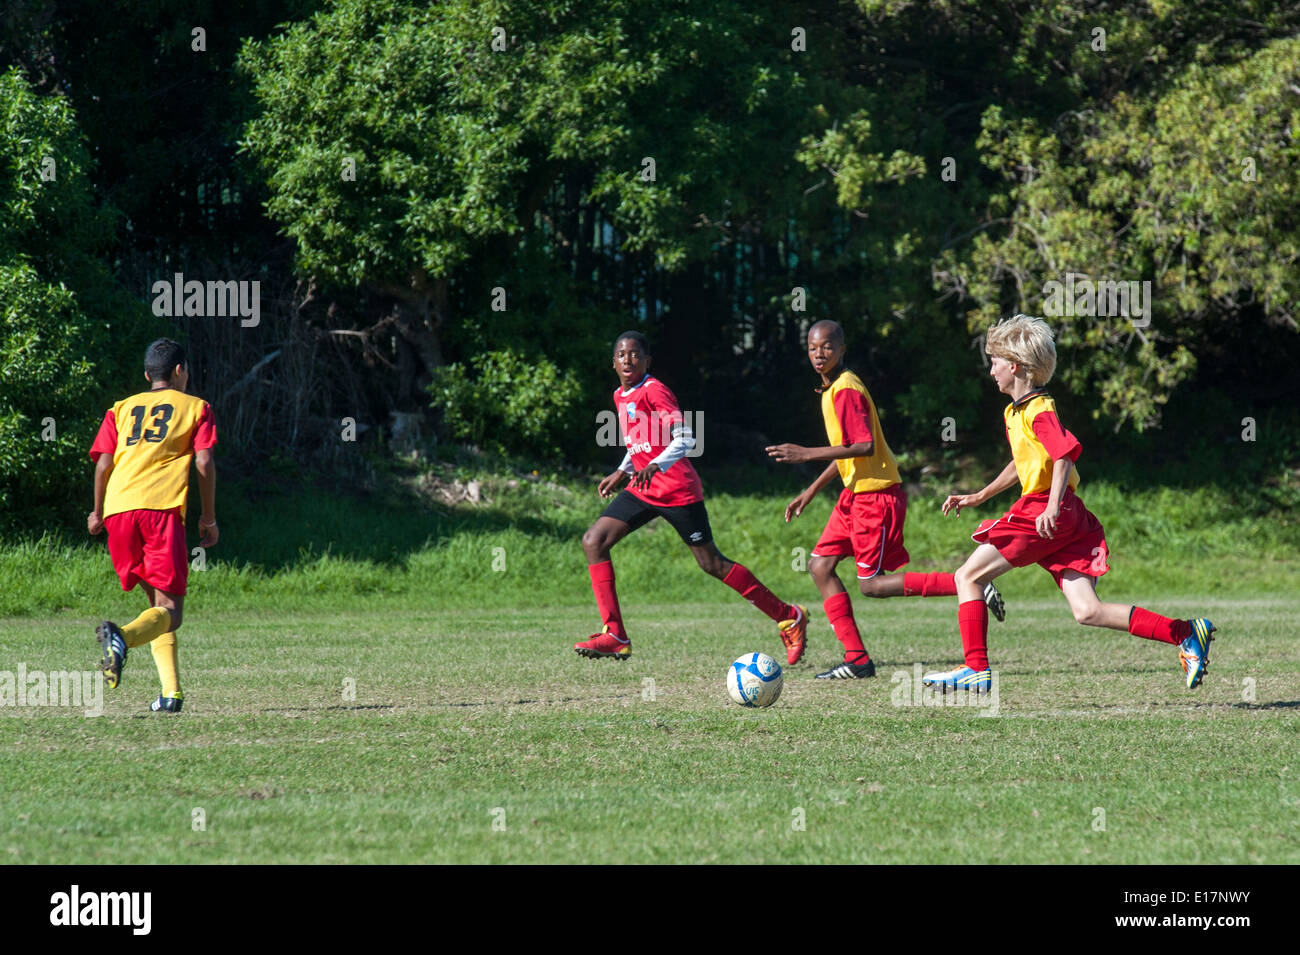 Junior football players chasing the ball, Cape Town, South Africa Stock Photo